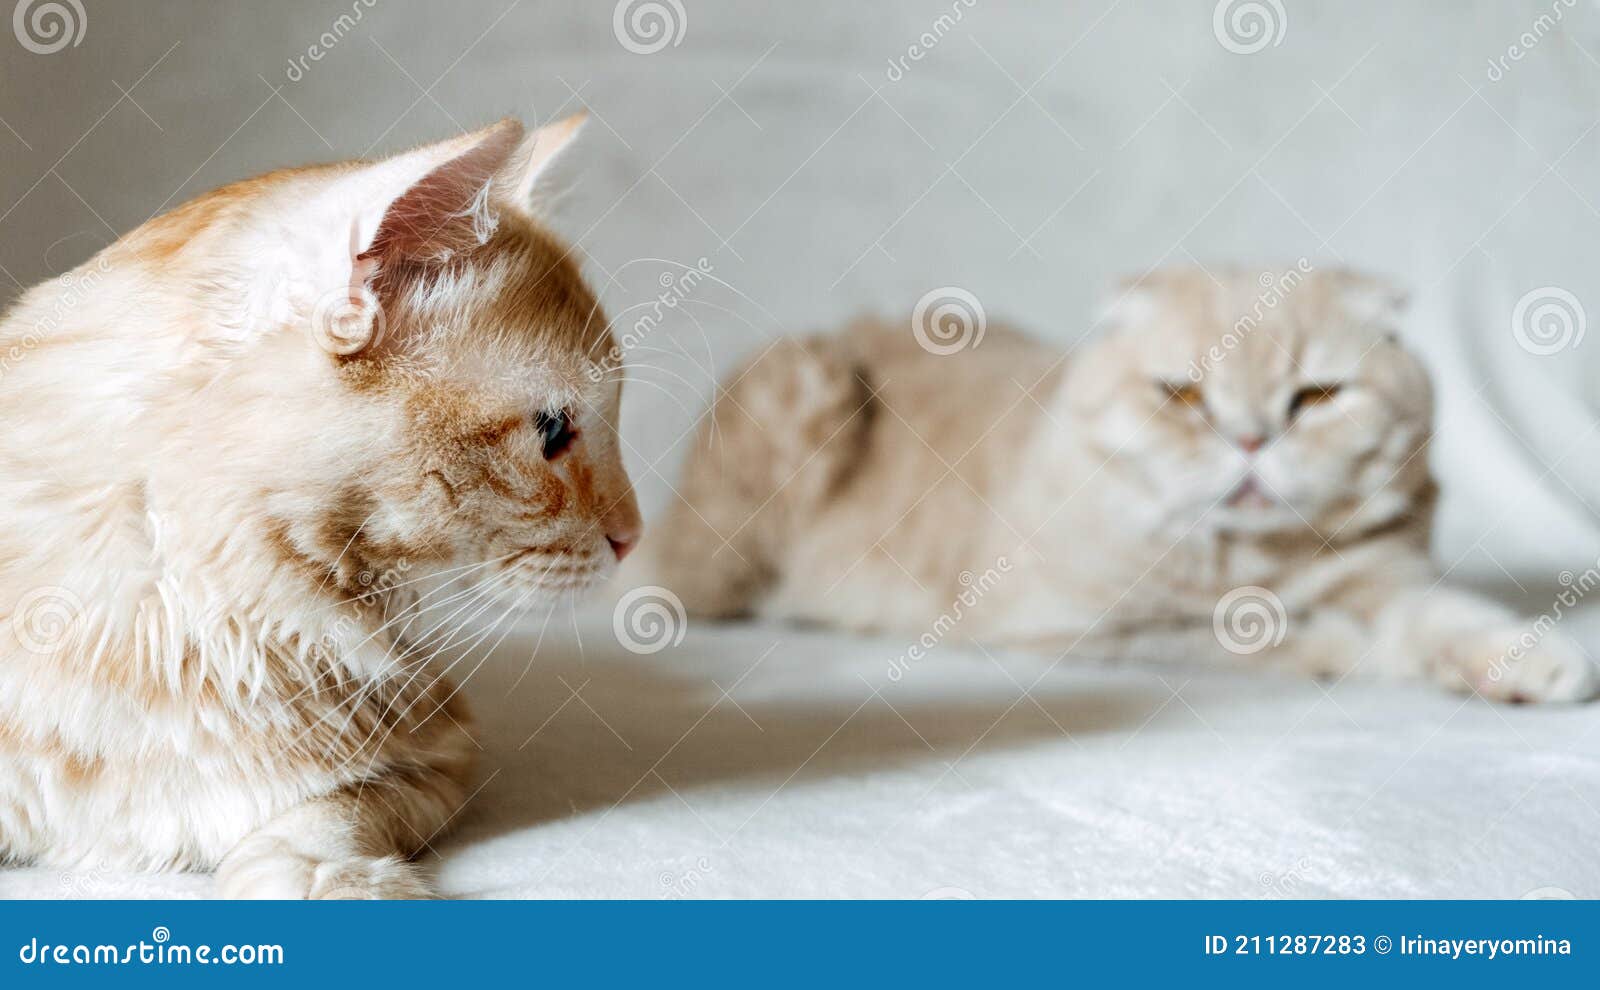 Introducing Two Cats. Adopt a Second Cat. Adding a Second Cat To Your ...